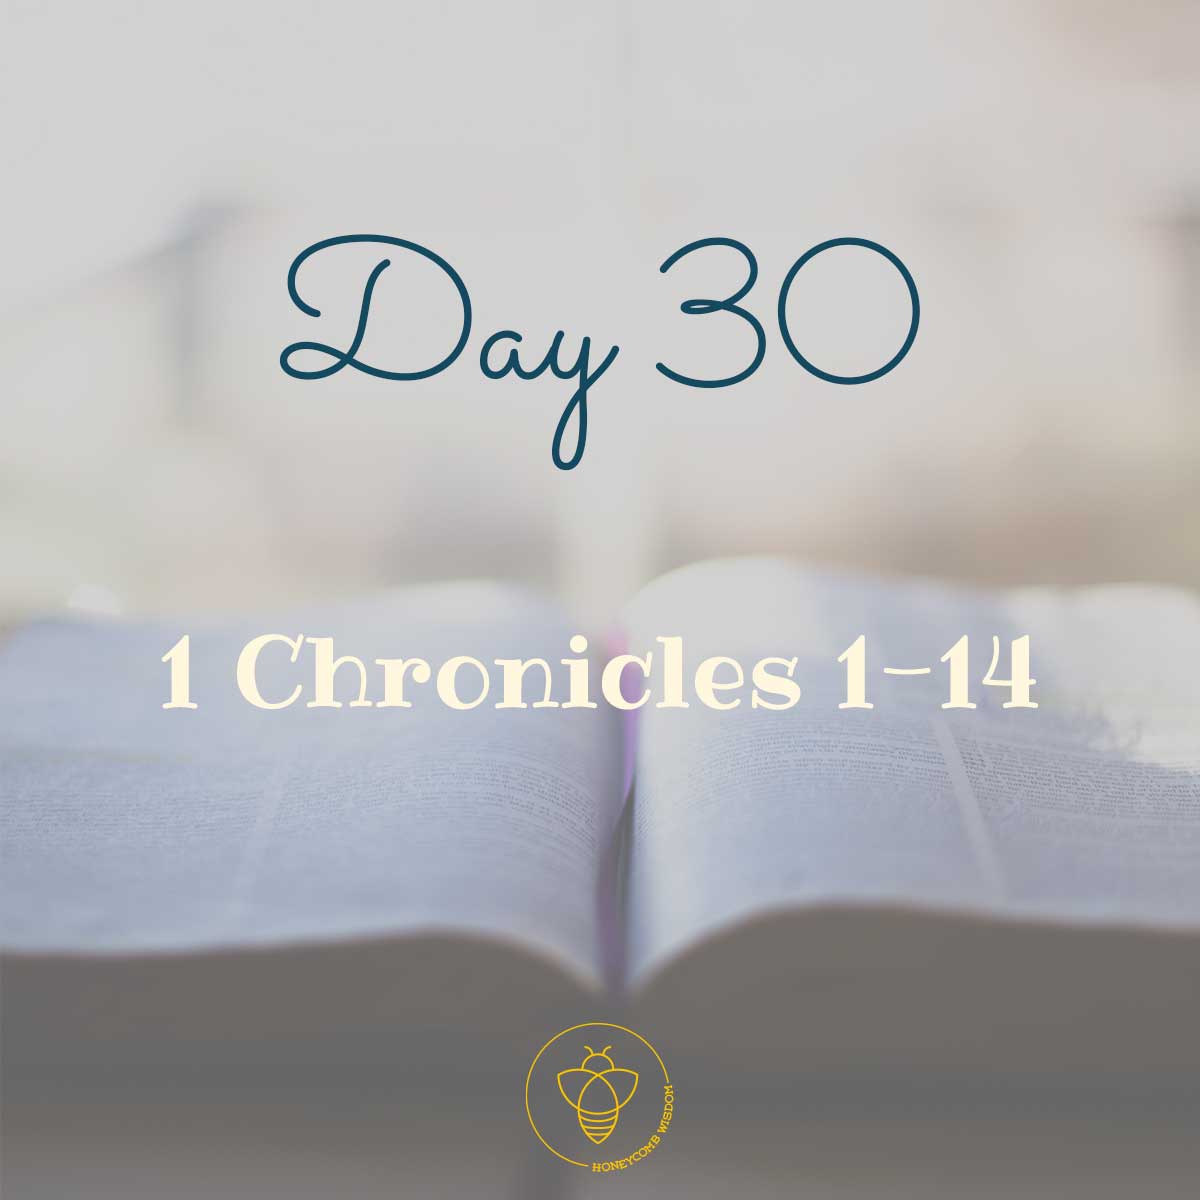 90 days through the bible 1 chronicles 1-14